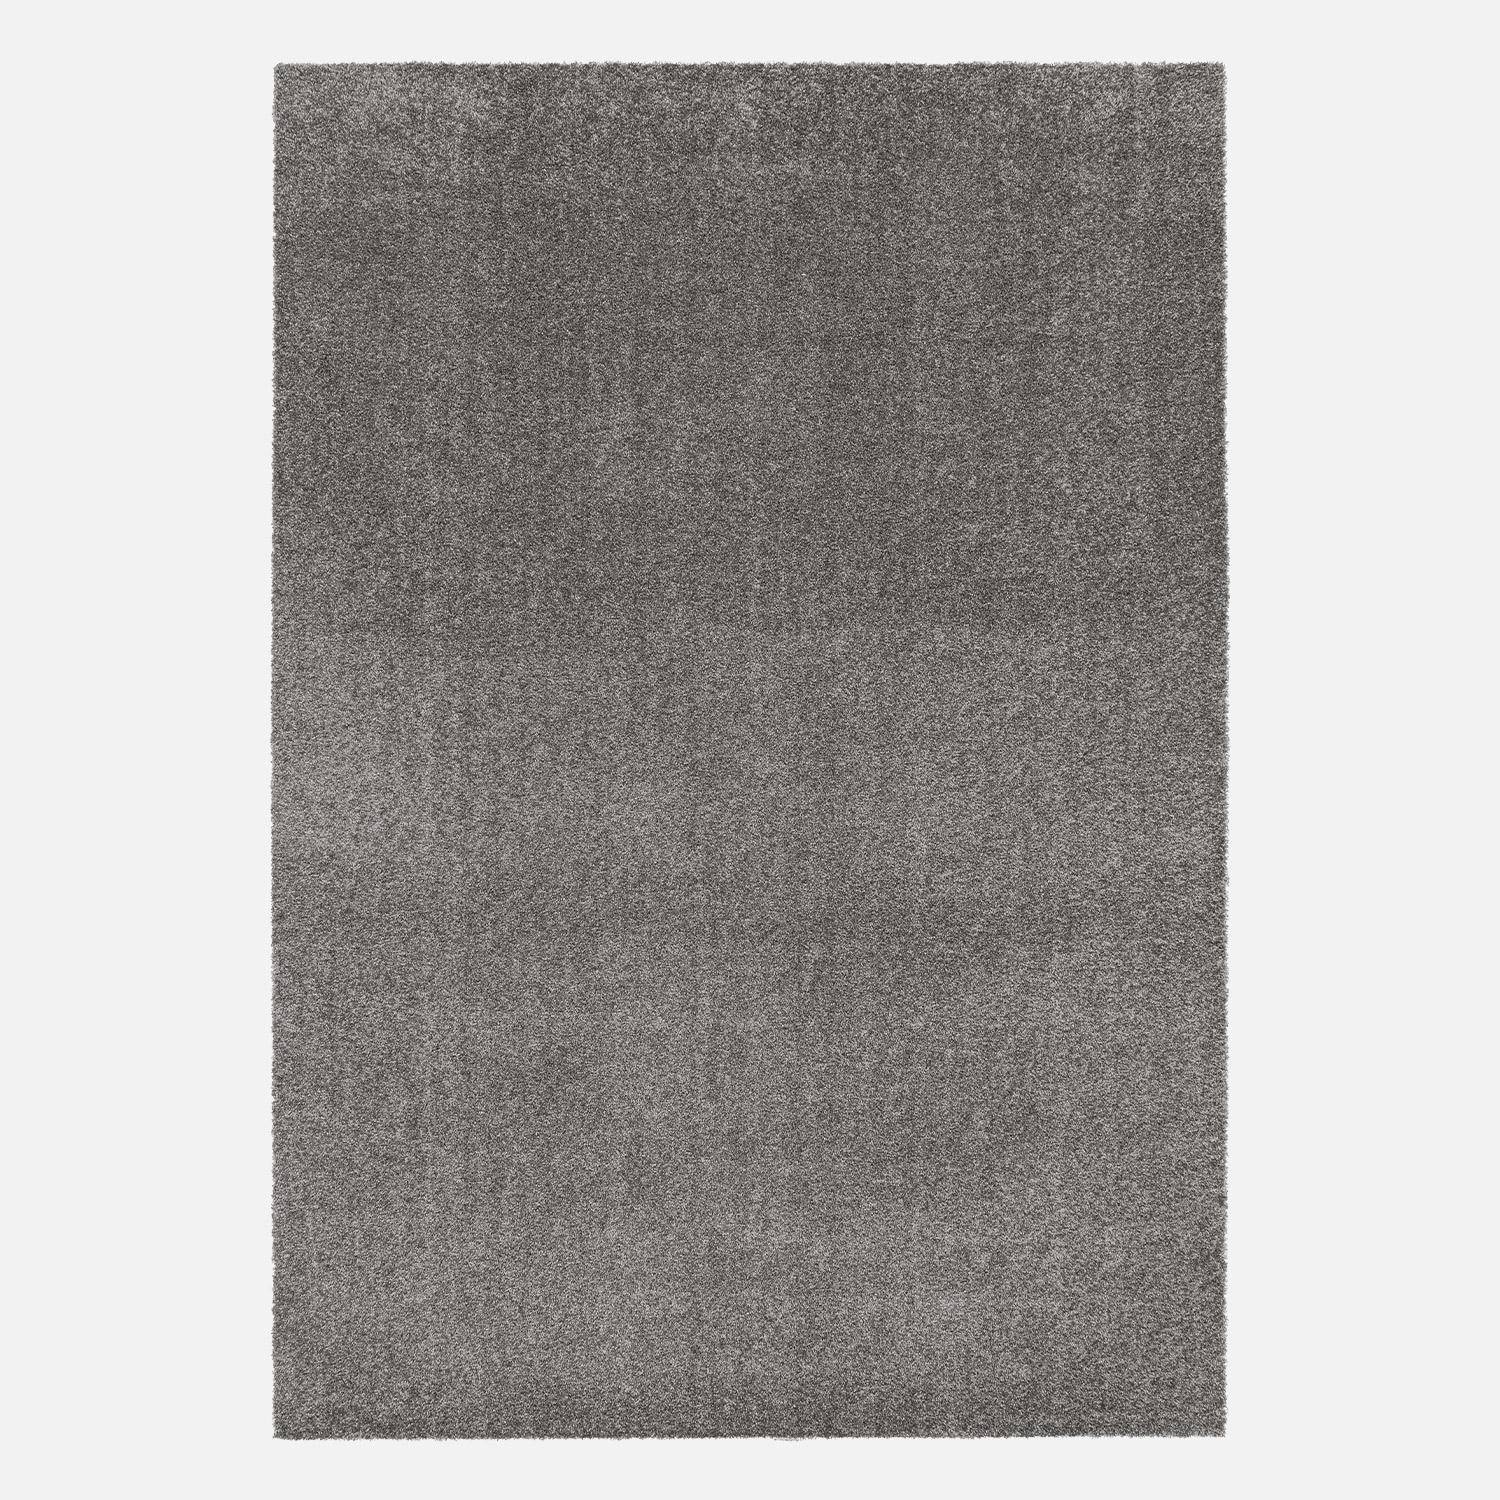 Anthracite grey curly velour interior carpet, Lawrence, 120 x 170 cm,sweeek,Photo4